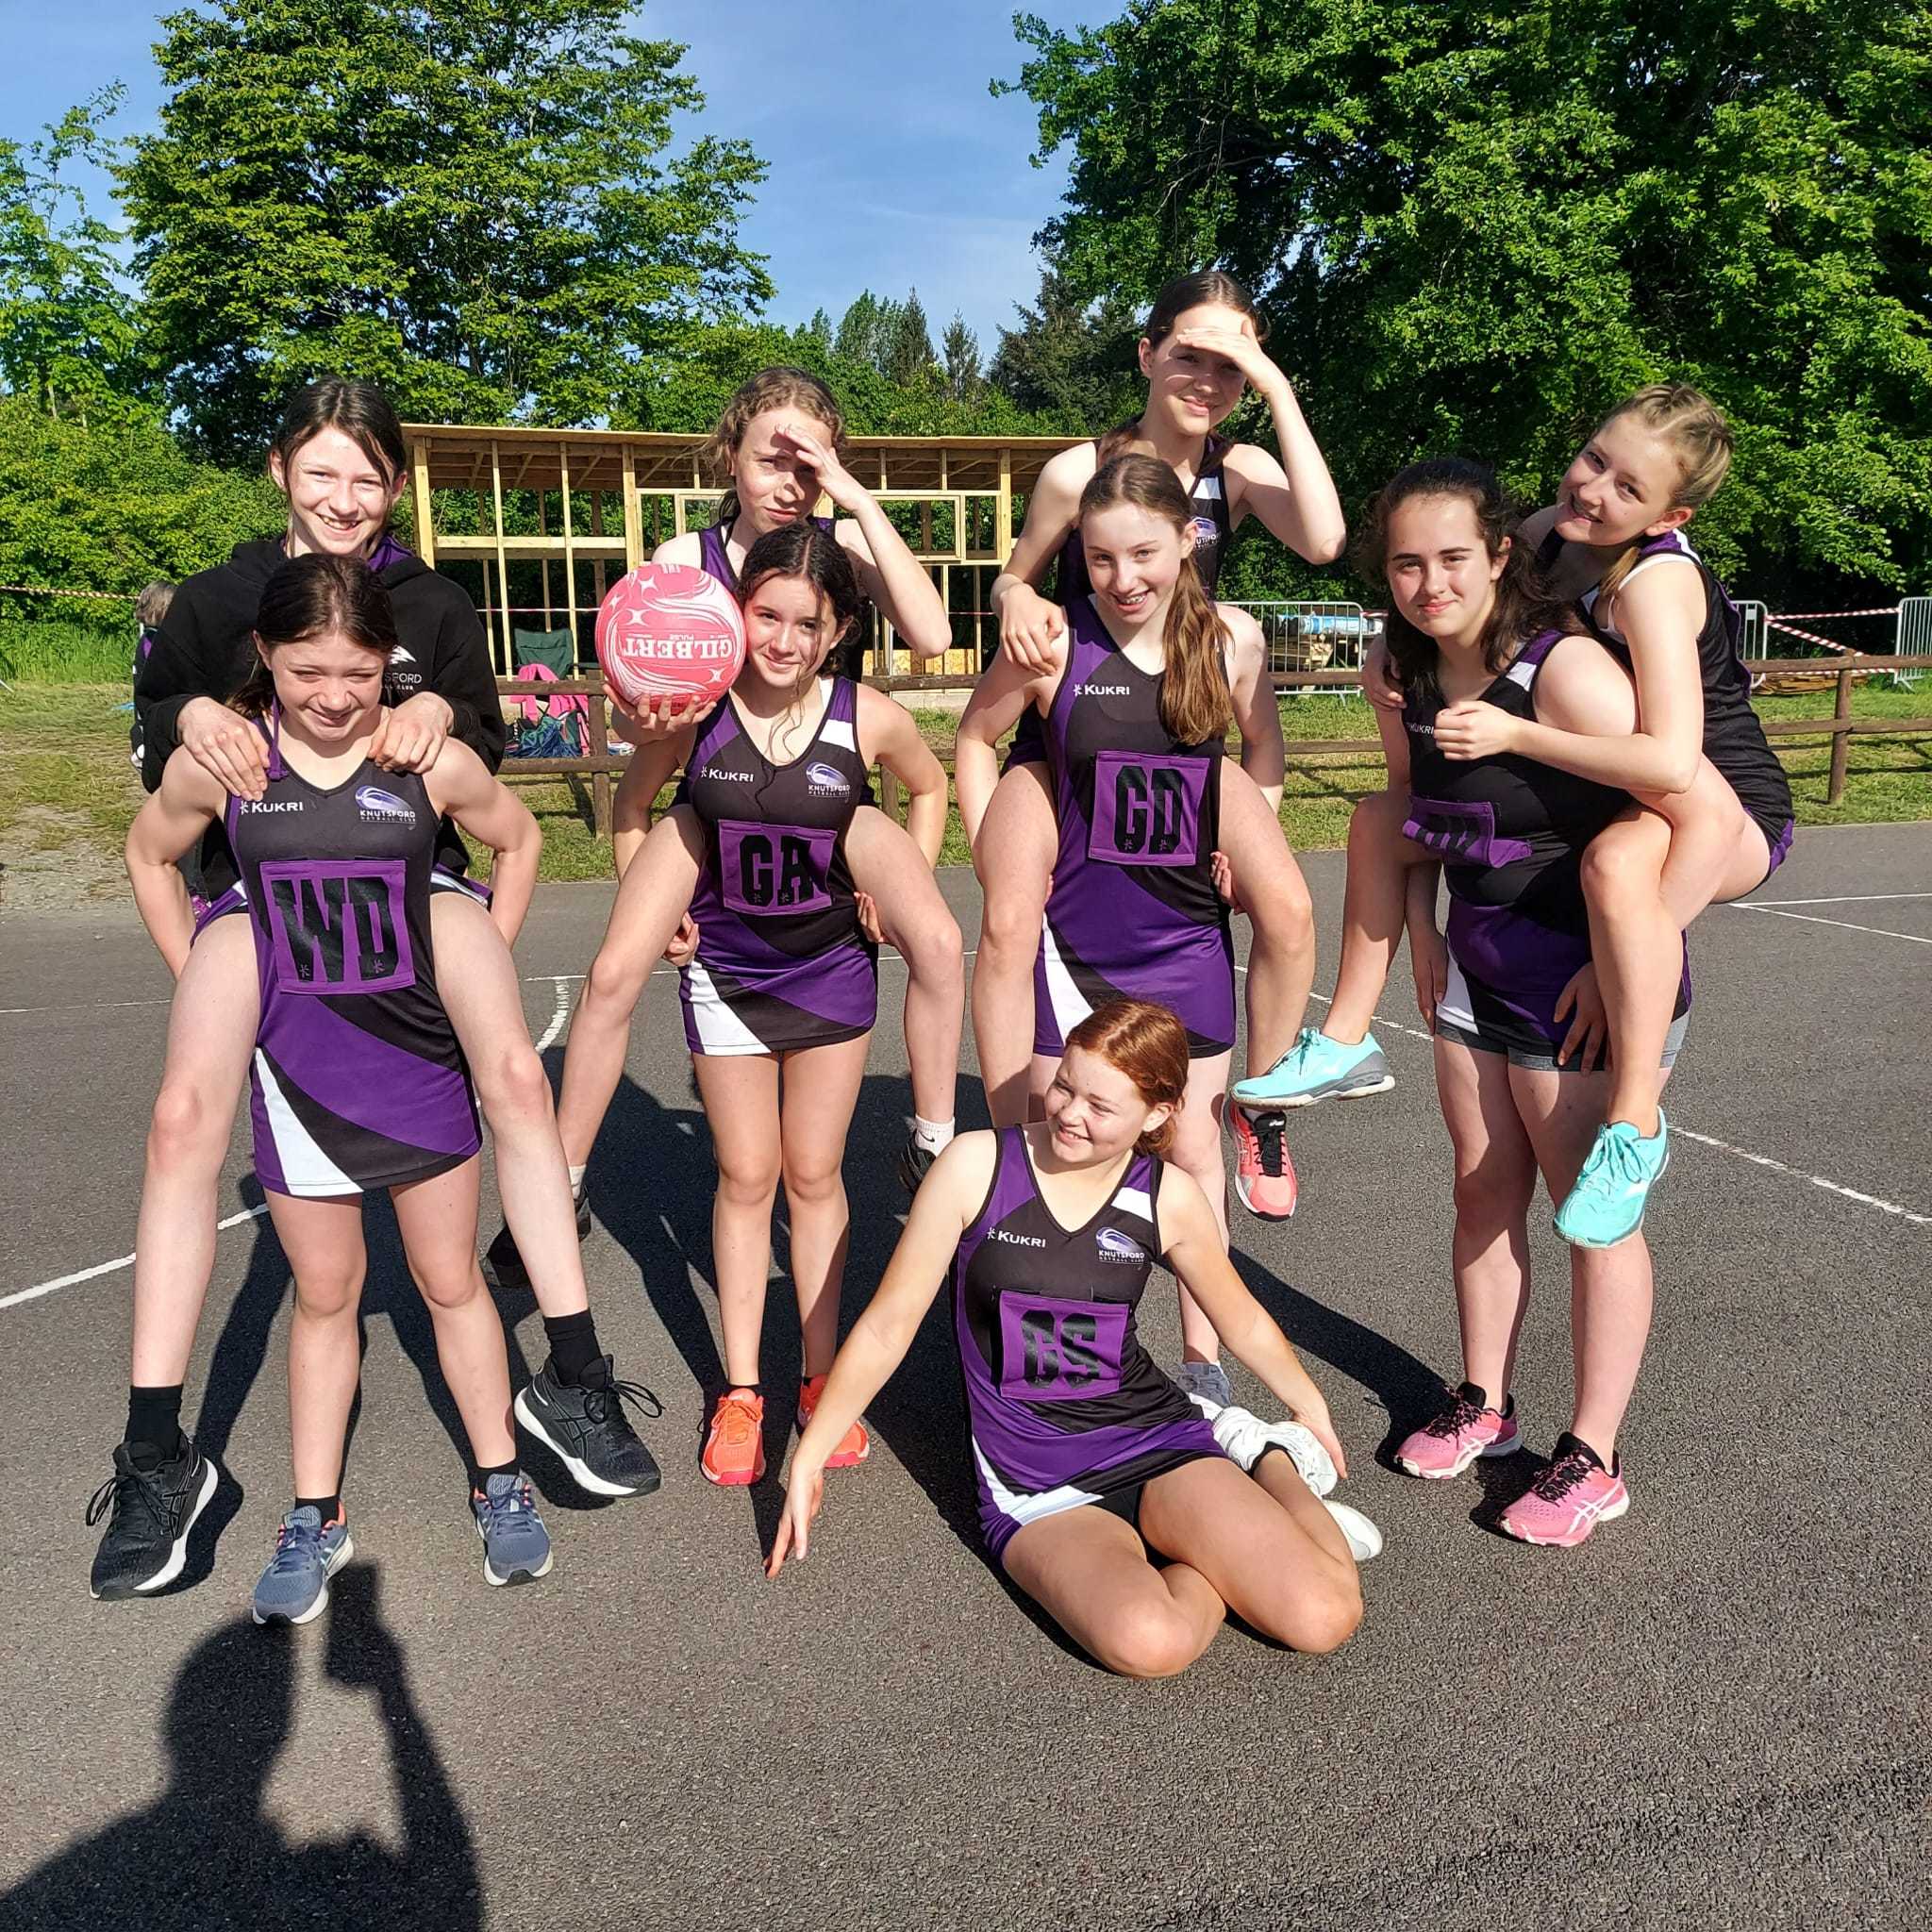 Knutsford Junior Netball Clubs youngest team at the event, the Falcons